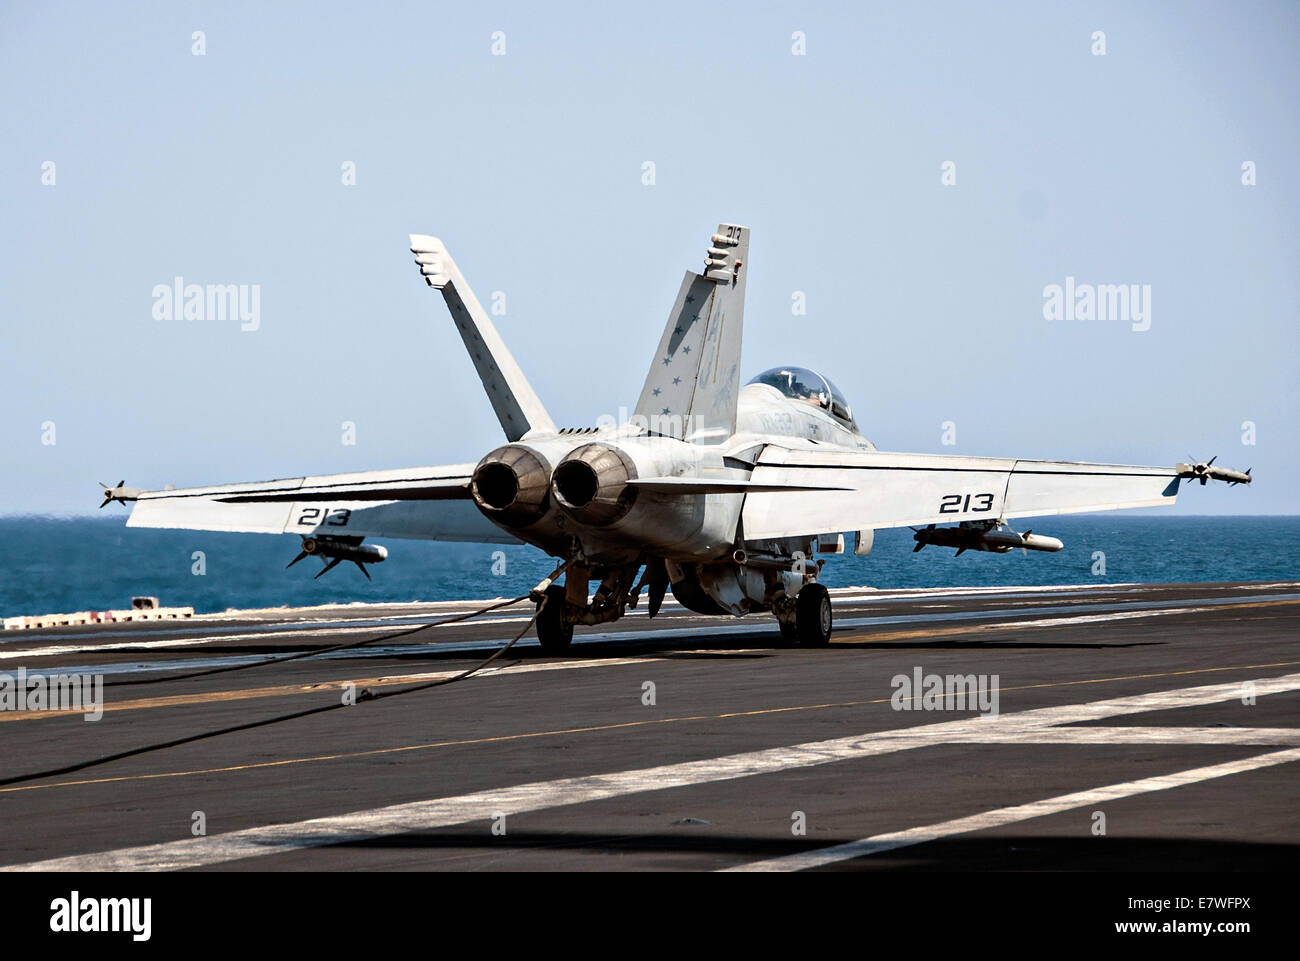 A US Navy F/A-18F Super Hornet fighter aircraft lands on the flight deck of the aircraft carrier USS George H.W. Bush after returning from a combat sortie against ISIS targets September 23, 2014 in the Persian Gulf. The military launched the first direct strikes on ISIS targets inside Syria. Stock Photo